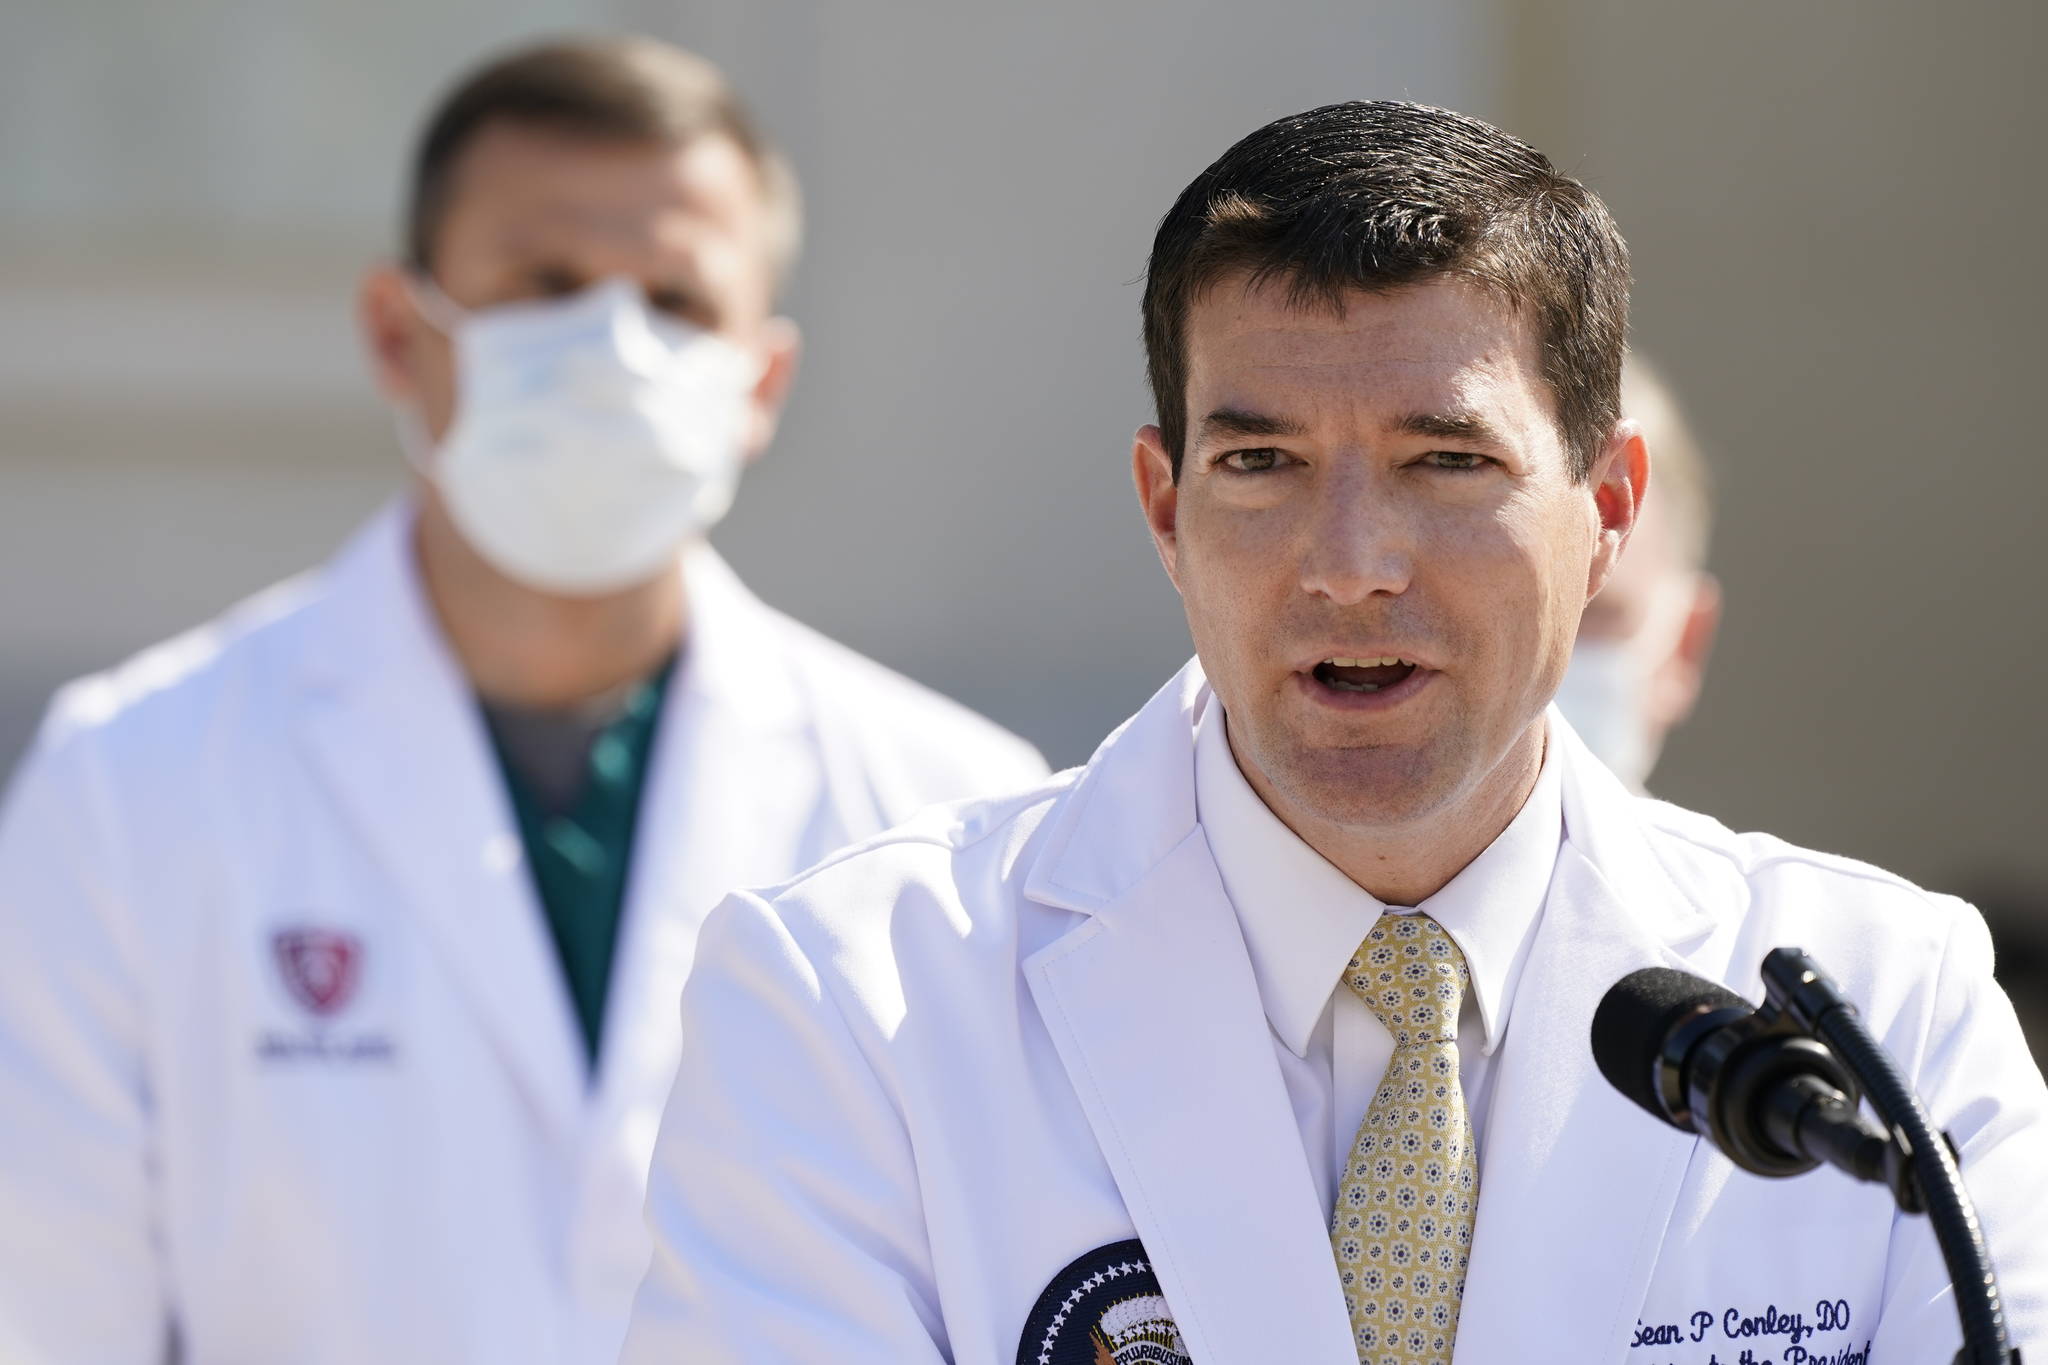 Dr. Sean Conley, physician to President Donald Trump, briefs reporters at Walter Reed National Military Medical Center in Bethesda, Md., Sunday, Oct. 4, 2020. Trump was admitted to the hospital after contracting the coronavirus. (AP Photo/Jacquelyn Martin)